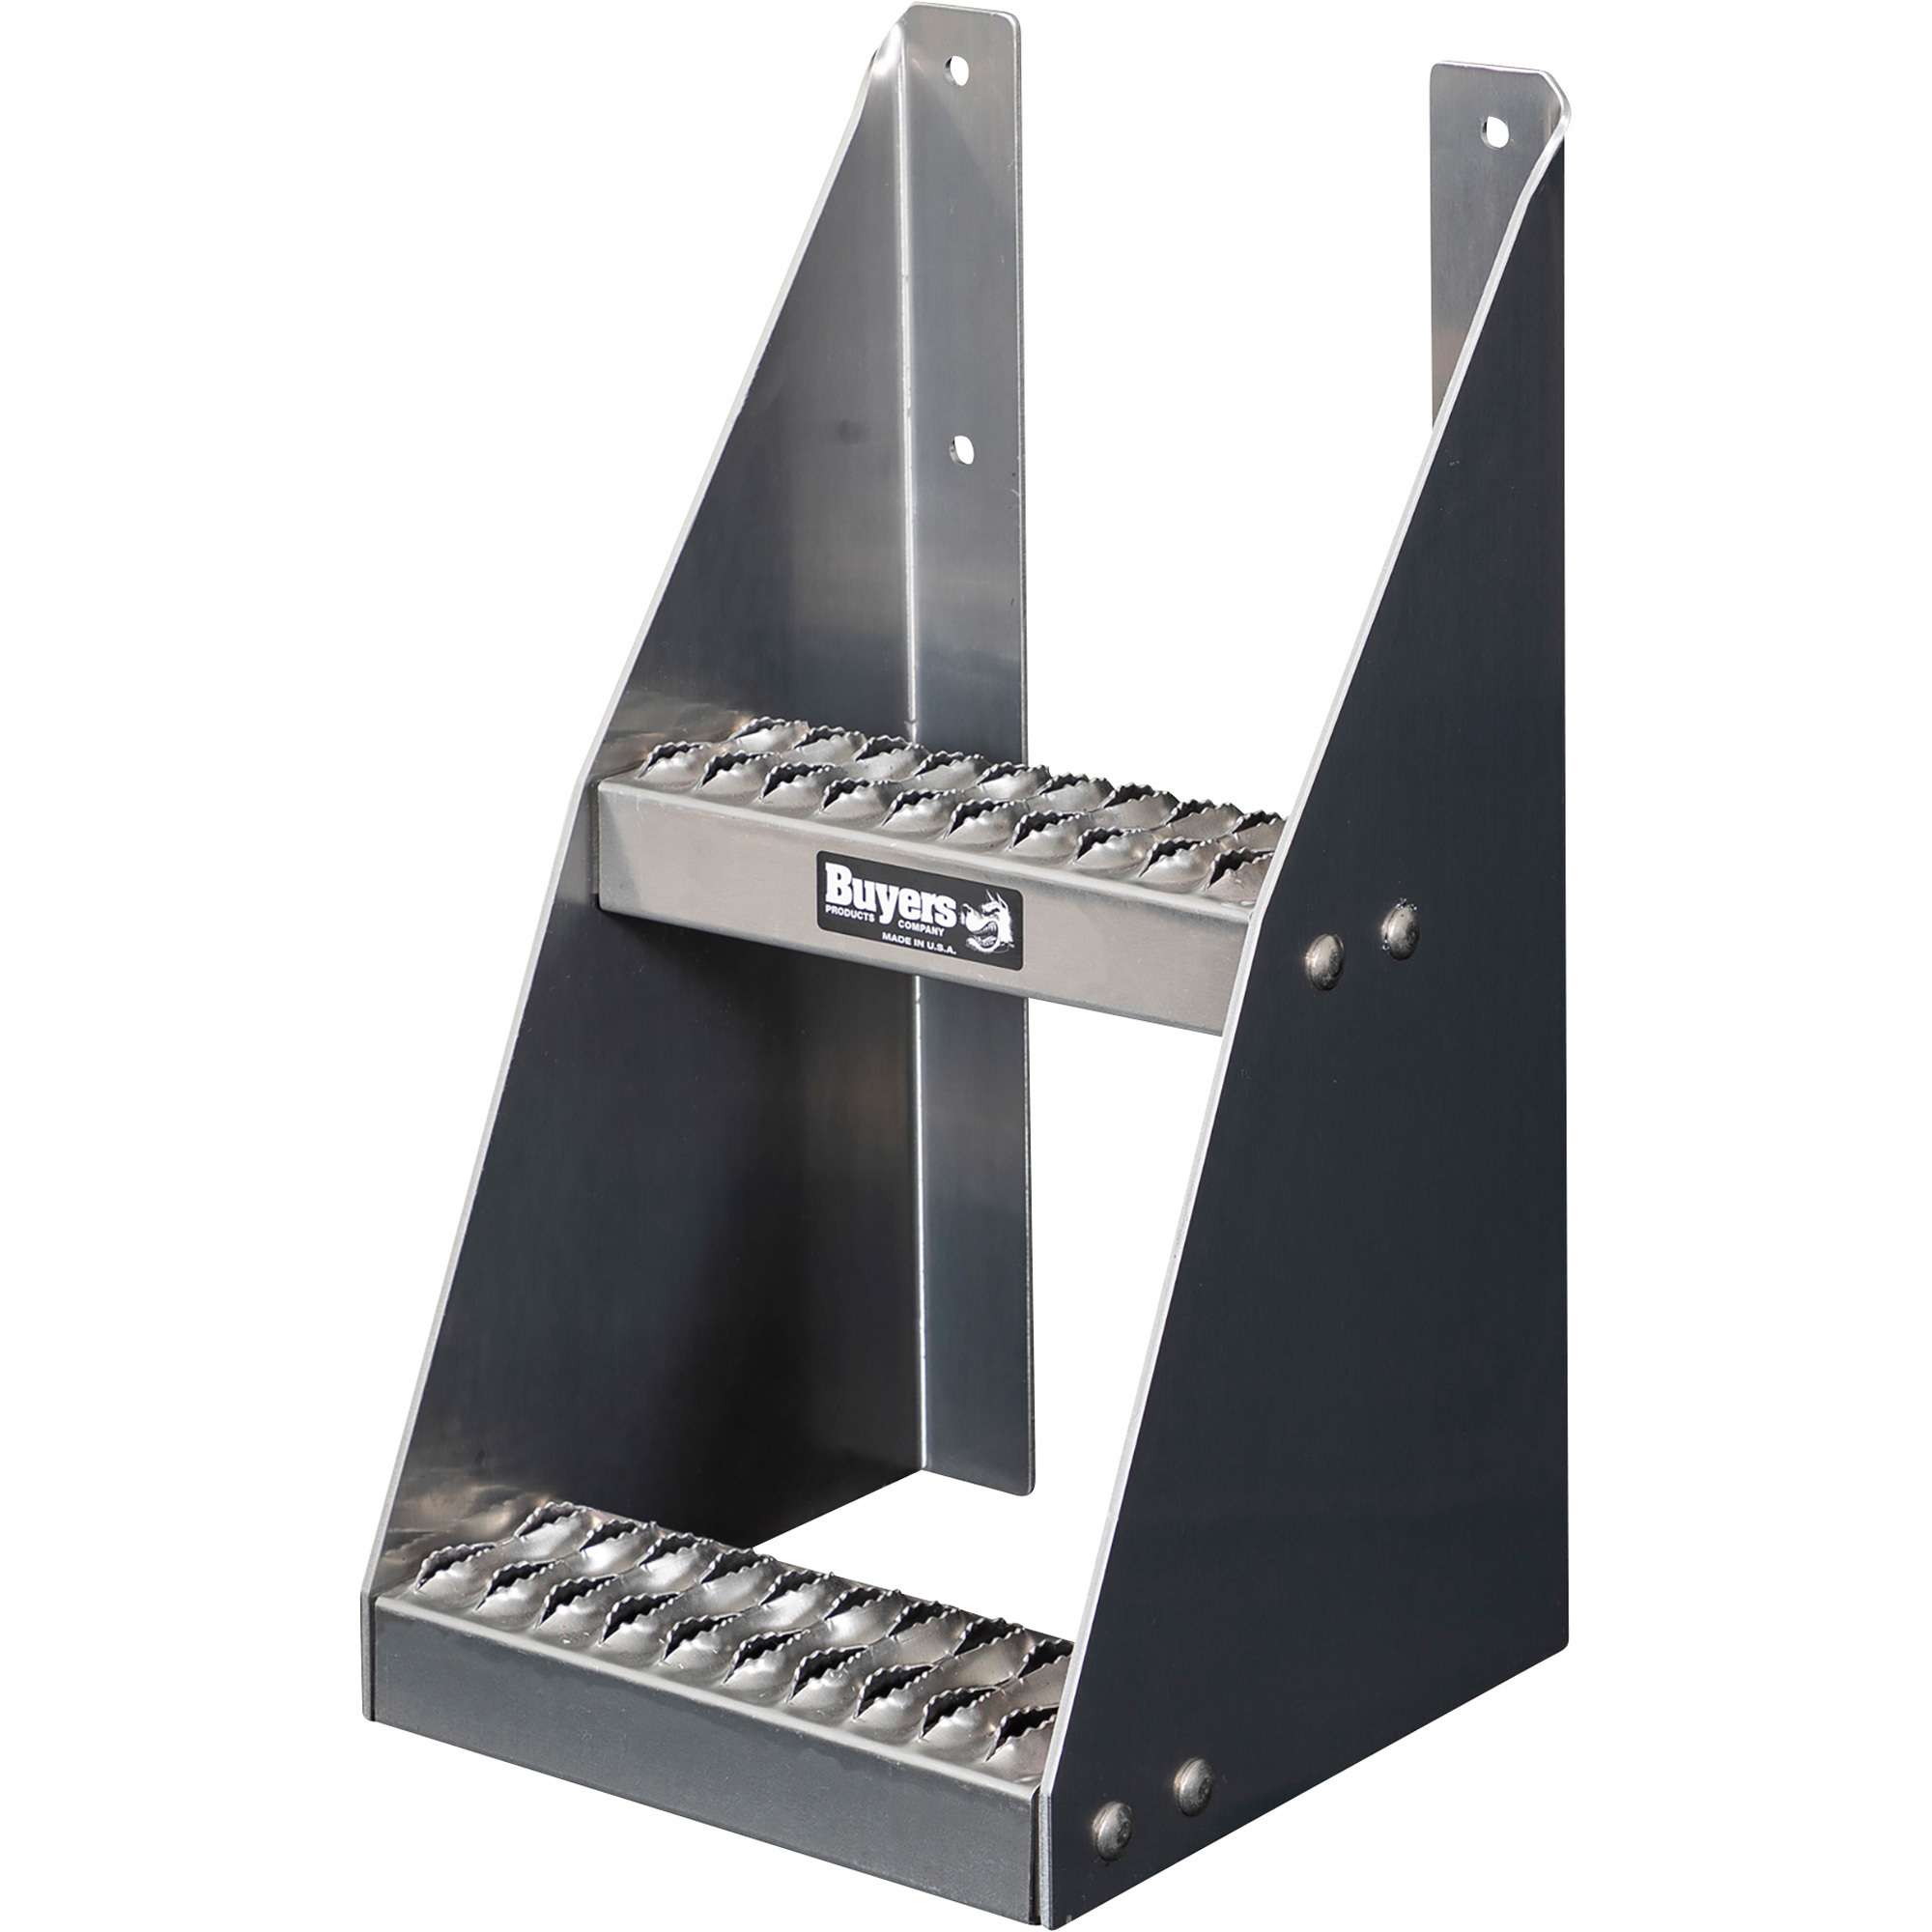 Buyers Products Class 8 Aluminum Frame Steps, Model 5239012